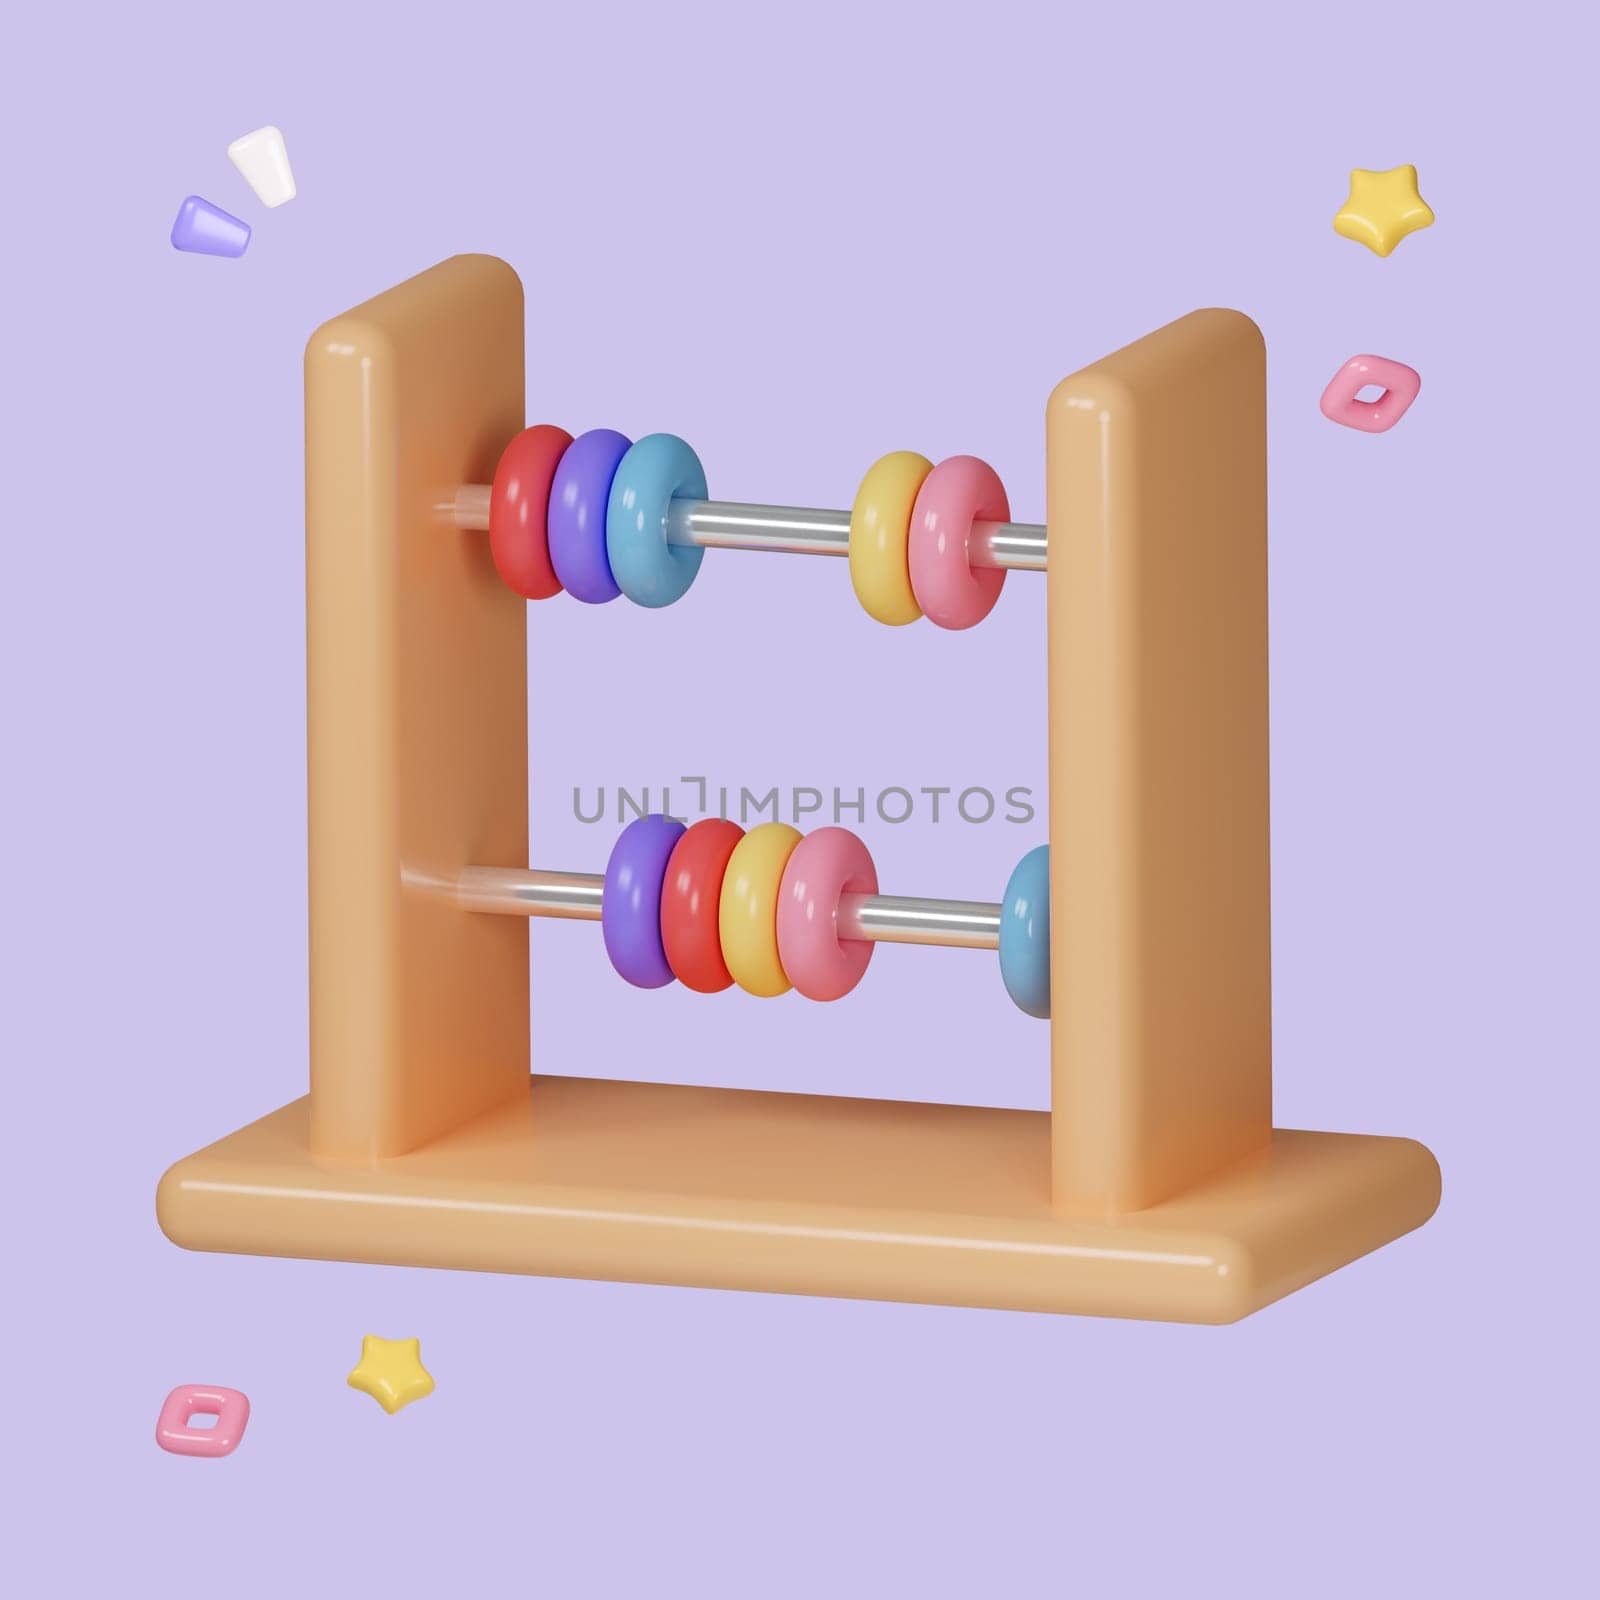 Cute colorful abacus icon cute smooth on pastel background, arithmetic game learn counting number concept. finance education. icon symbol clipping path. 3d render illustration by meepiangraphic